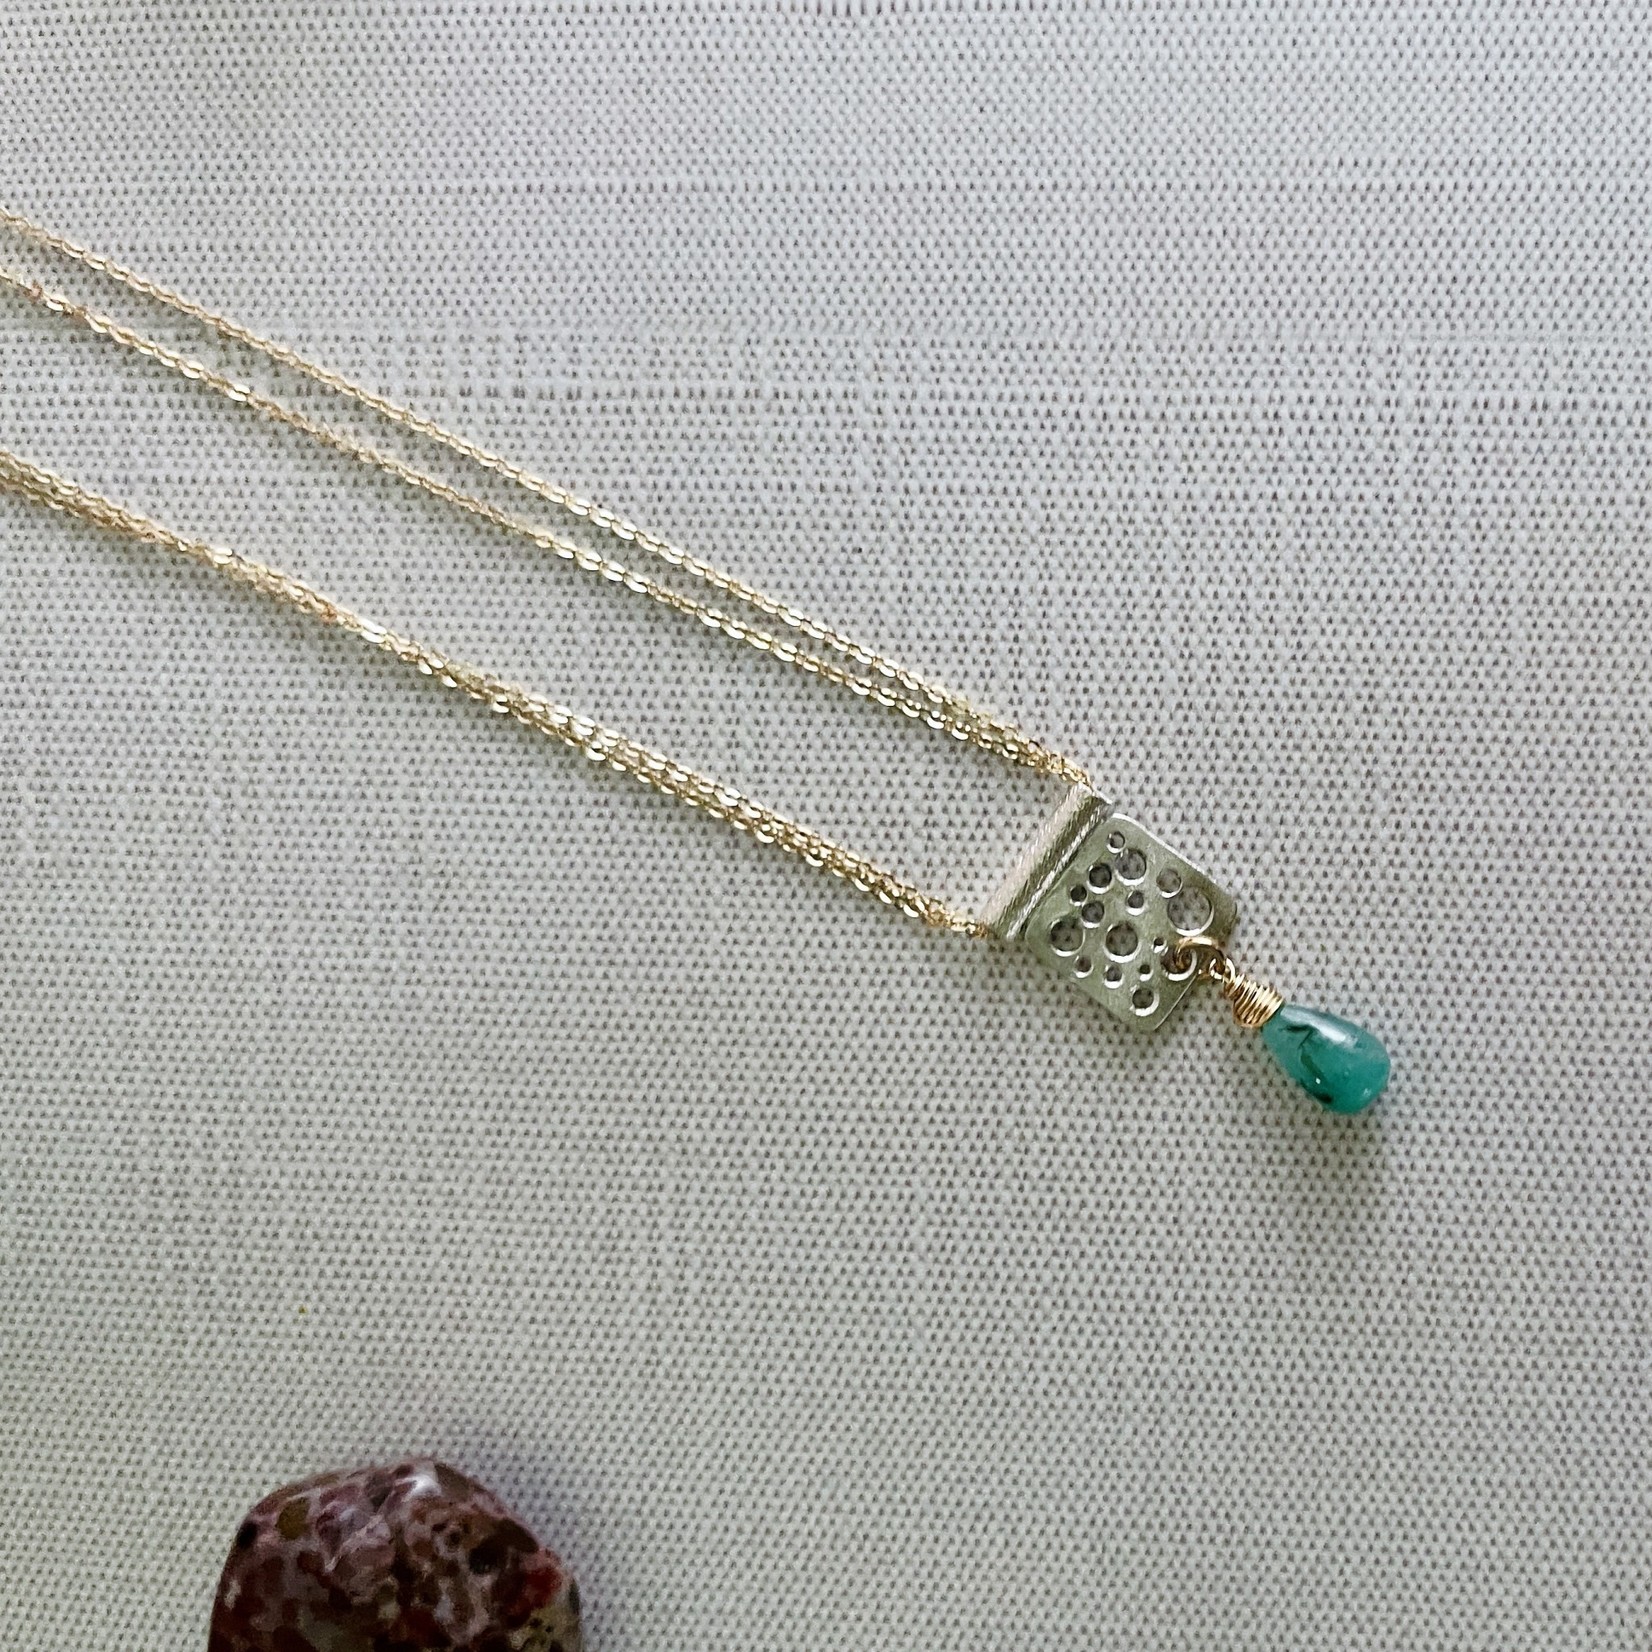 Handmade Necklace with brushed square with circles, double 14 k g.f. chain, emerald briolette